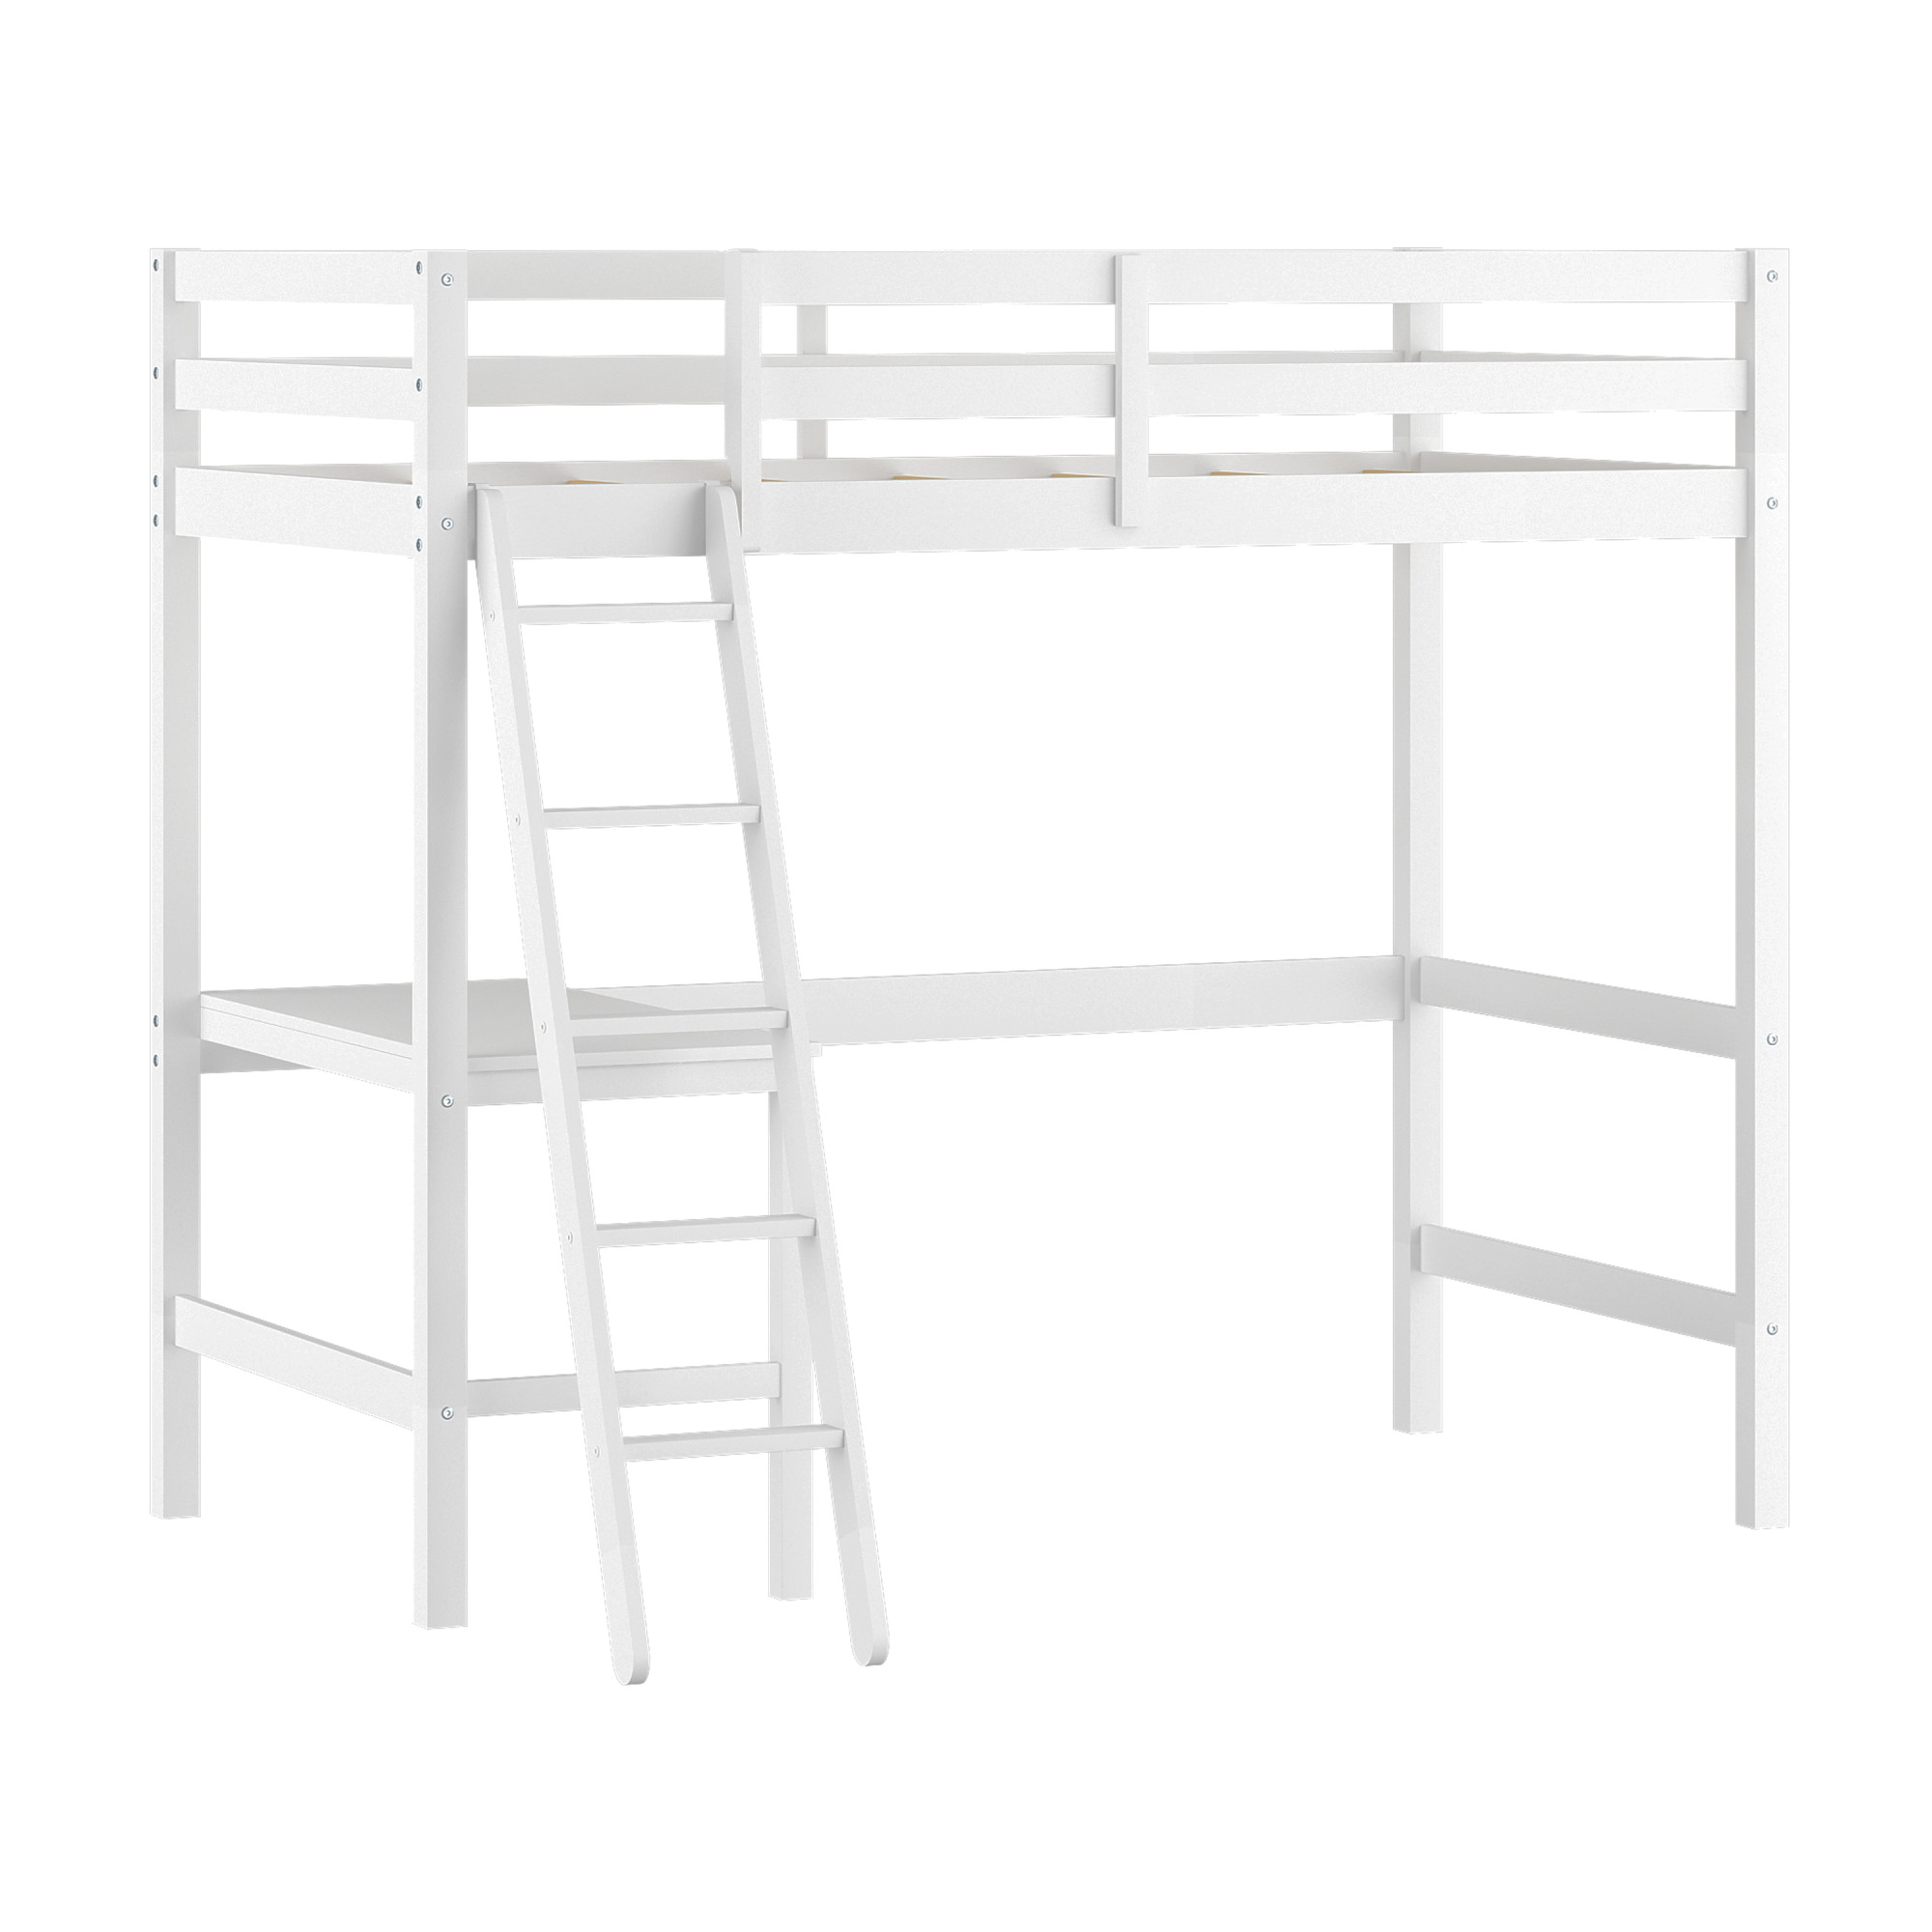 Hillsdale Campbell Wood Twin Loft Bunk Bed with Desk, White - image 4 of 14